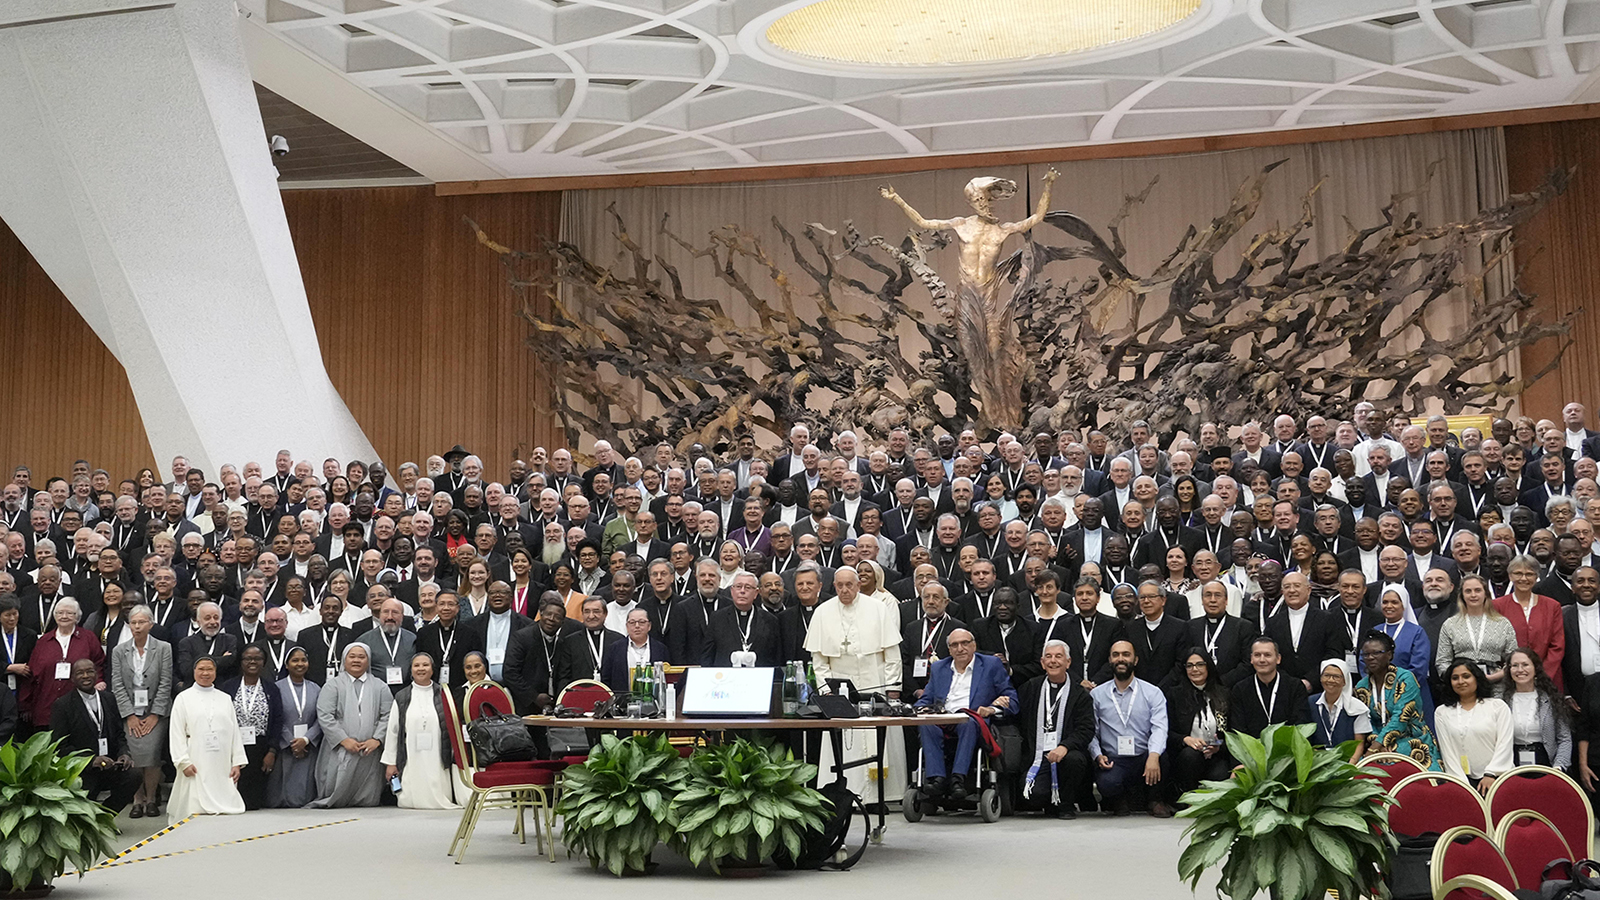 Pope Francis poses for a picture with participants of the Synod of Bishops’ 16th General Assembly in the Paul VI Hall at the Vatican, Oct. 23, 2023. (AP Photo/Gregorio Borgia)